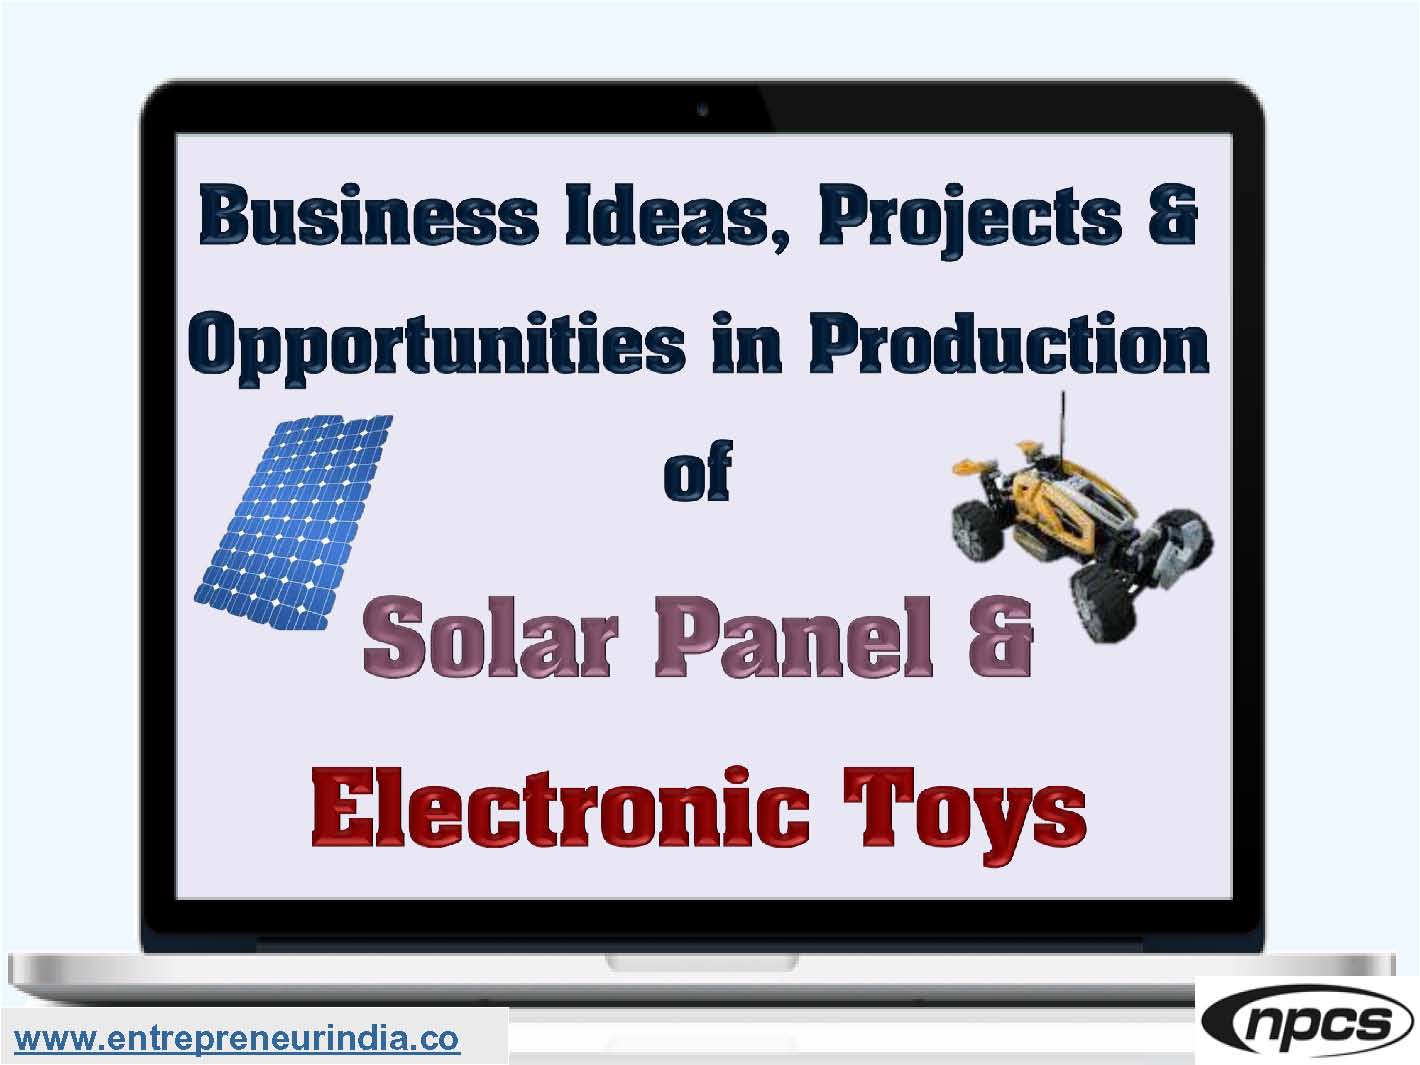 Business Ideas, Projects & Opportunities in Production of Solar Panel & Electronic Toys